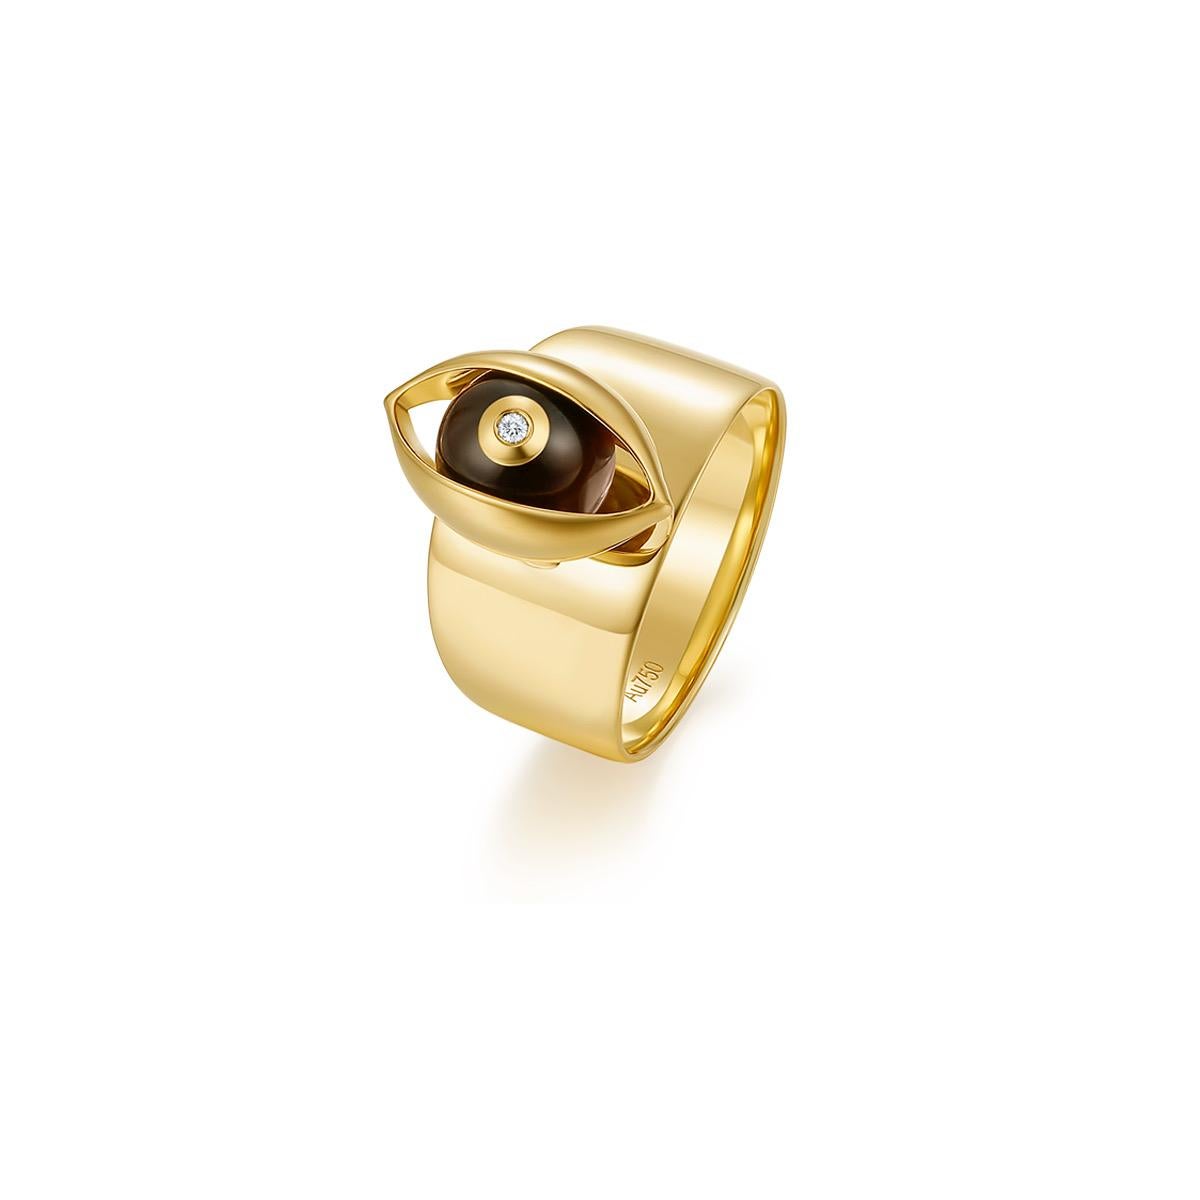 This very unique eye ring from The Eye collection, it's a perfect everyday talisman, elegant and stylish. The Eye collection, showcases this award winning, fine jewellery designer’s extraordinary talent to work with shapes, materials, texture and,